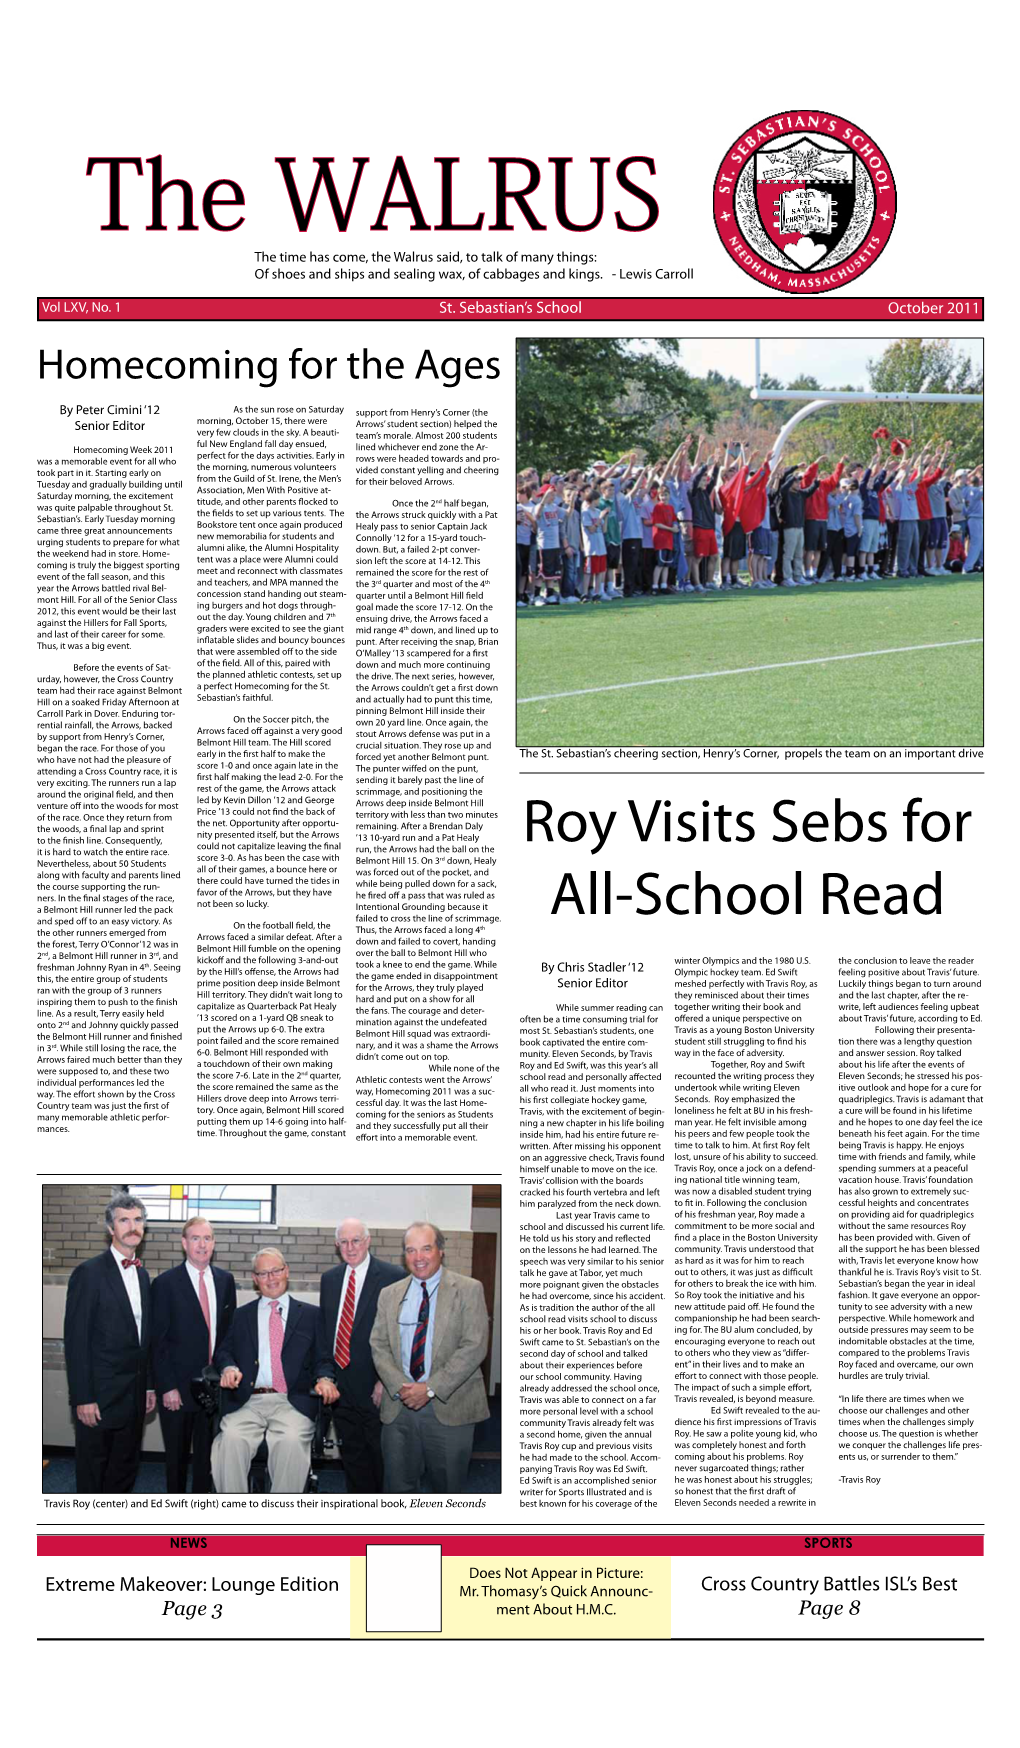 Roy Visits Sebs for All-School Read